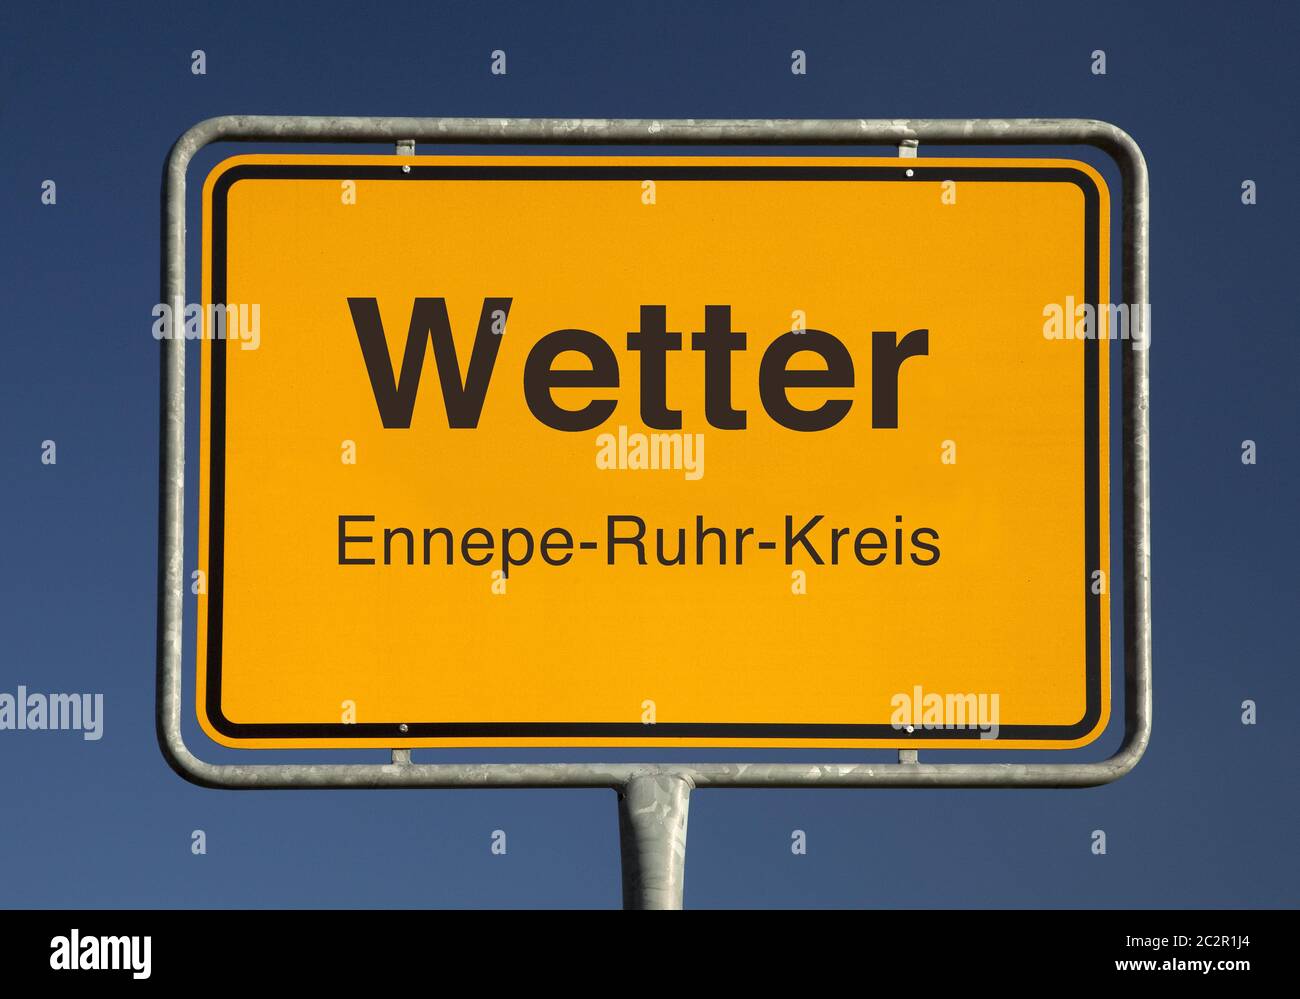 City limits sign, Wetter or weather, Ennepe-Ruhr district, North Rhine-Westphalia, Germany, Europe Stock Photo